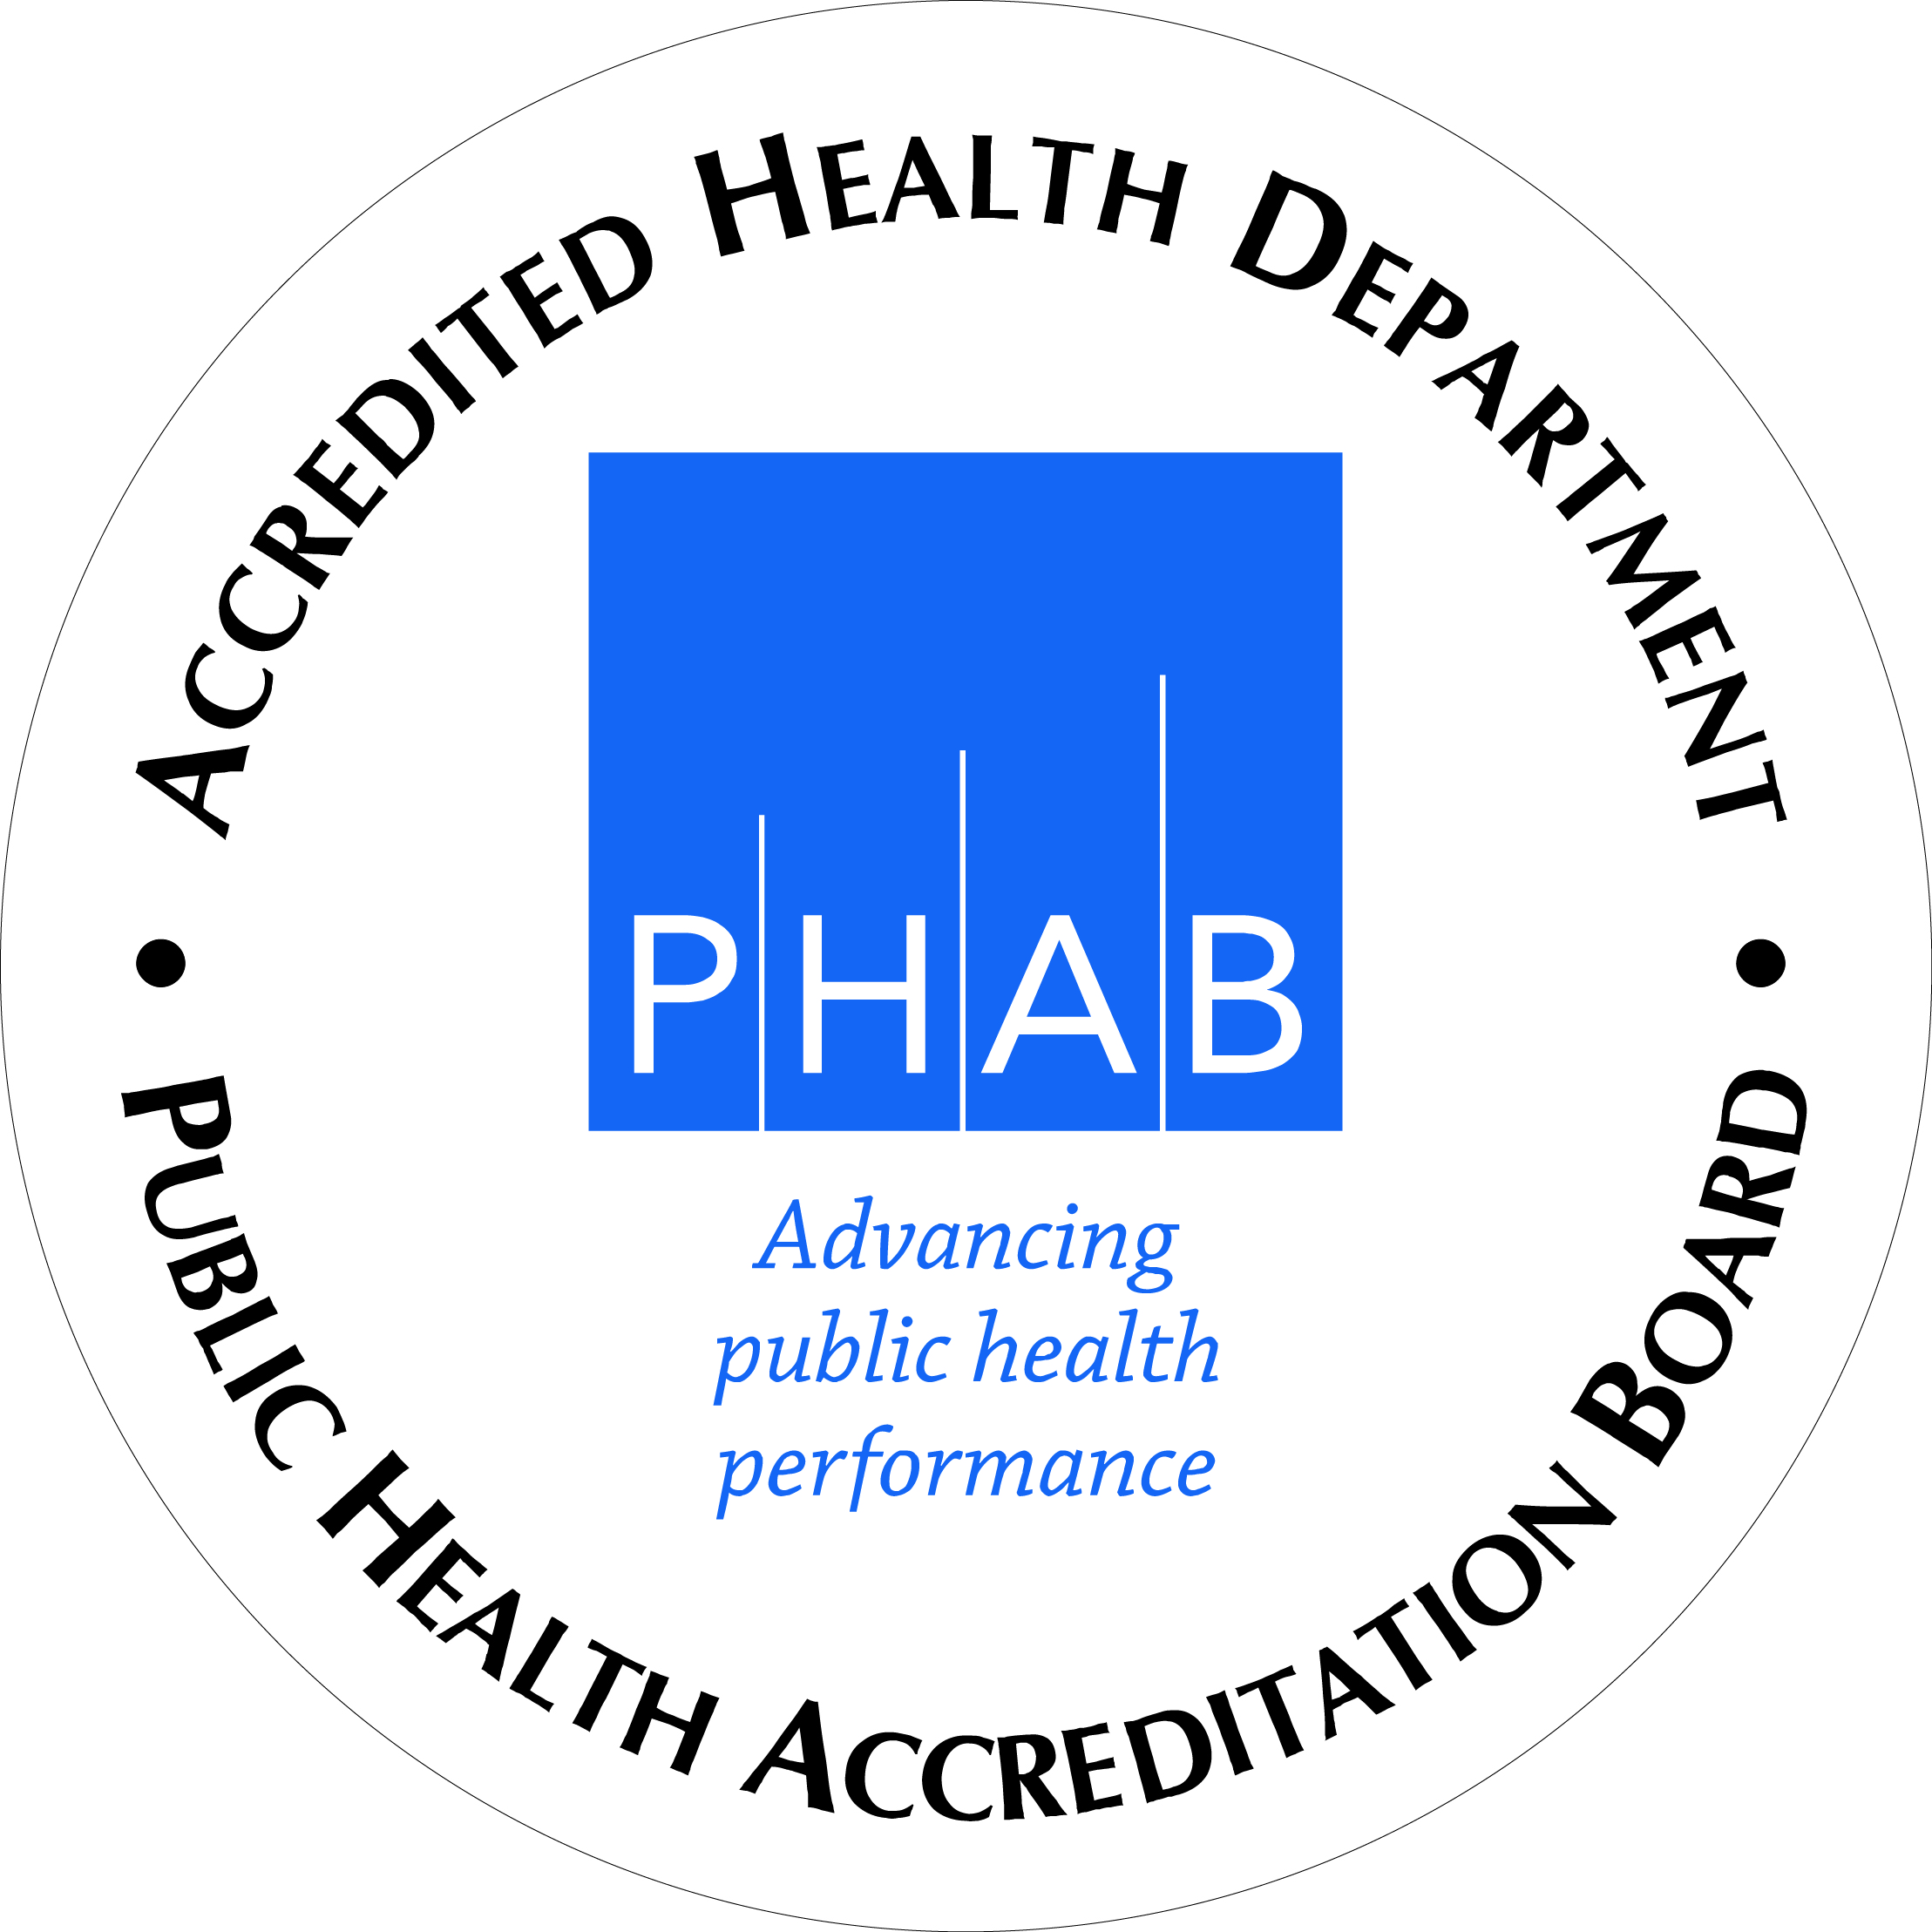 Accredited Health Department Seal from the Public Health Accreditation Board 